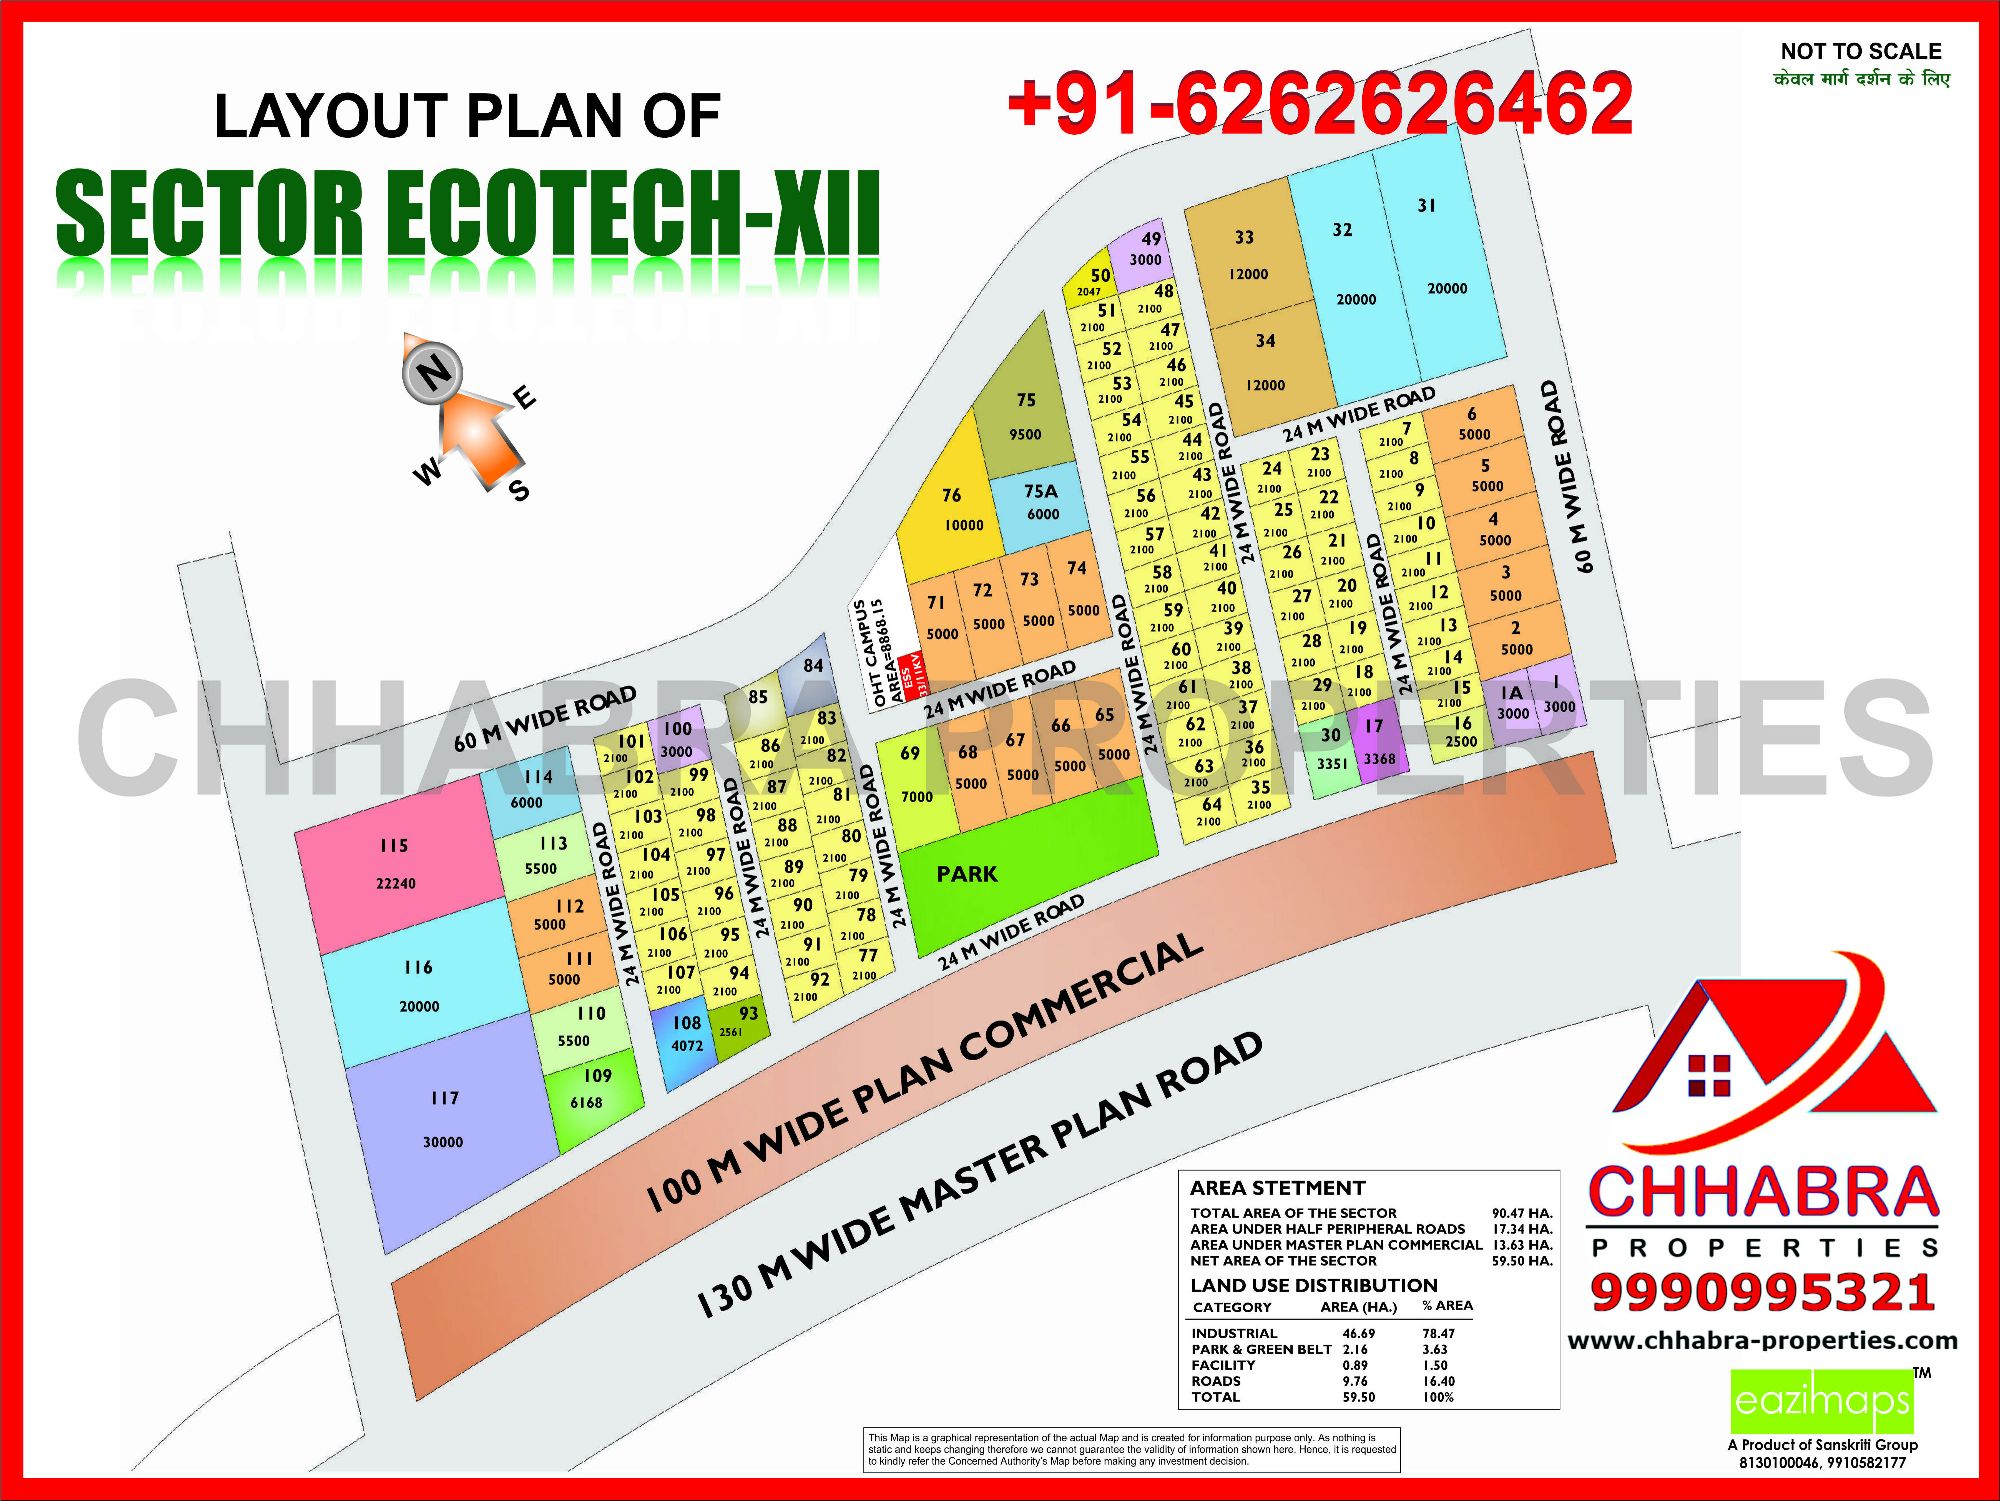 layout plan for greater noida sector echotech xii hd map